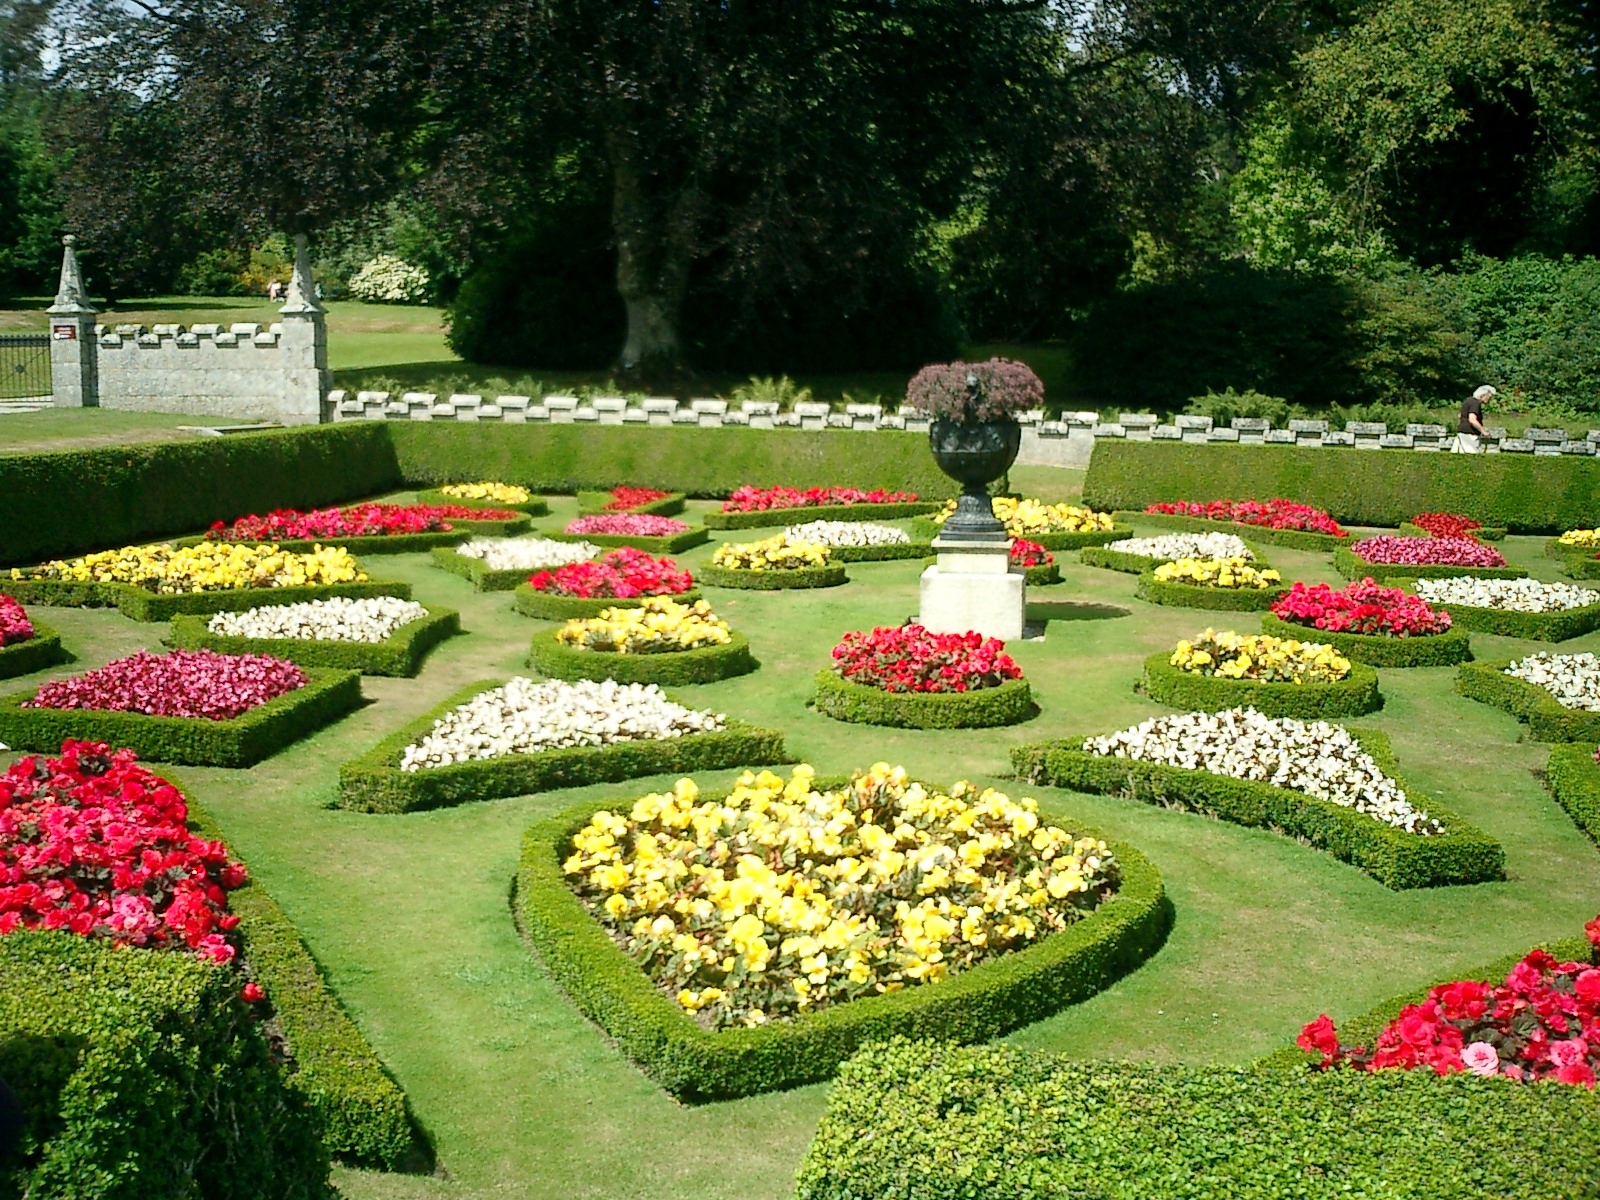 a large flower garden in the middle of some greenery